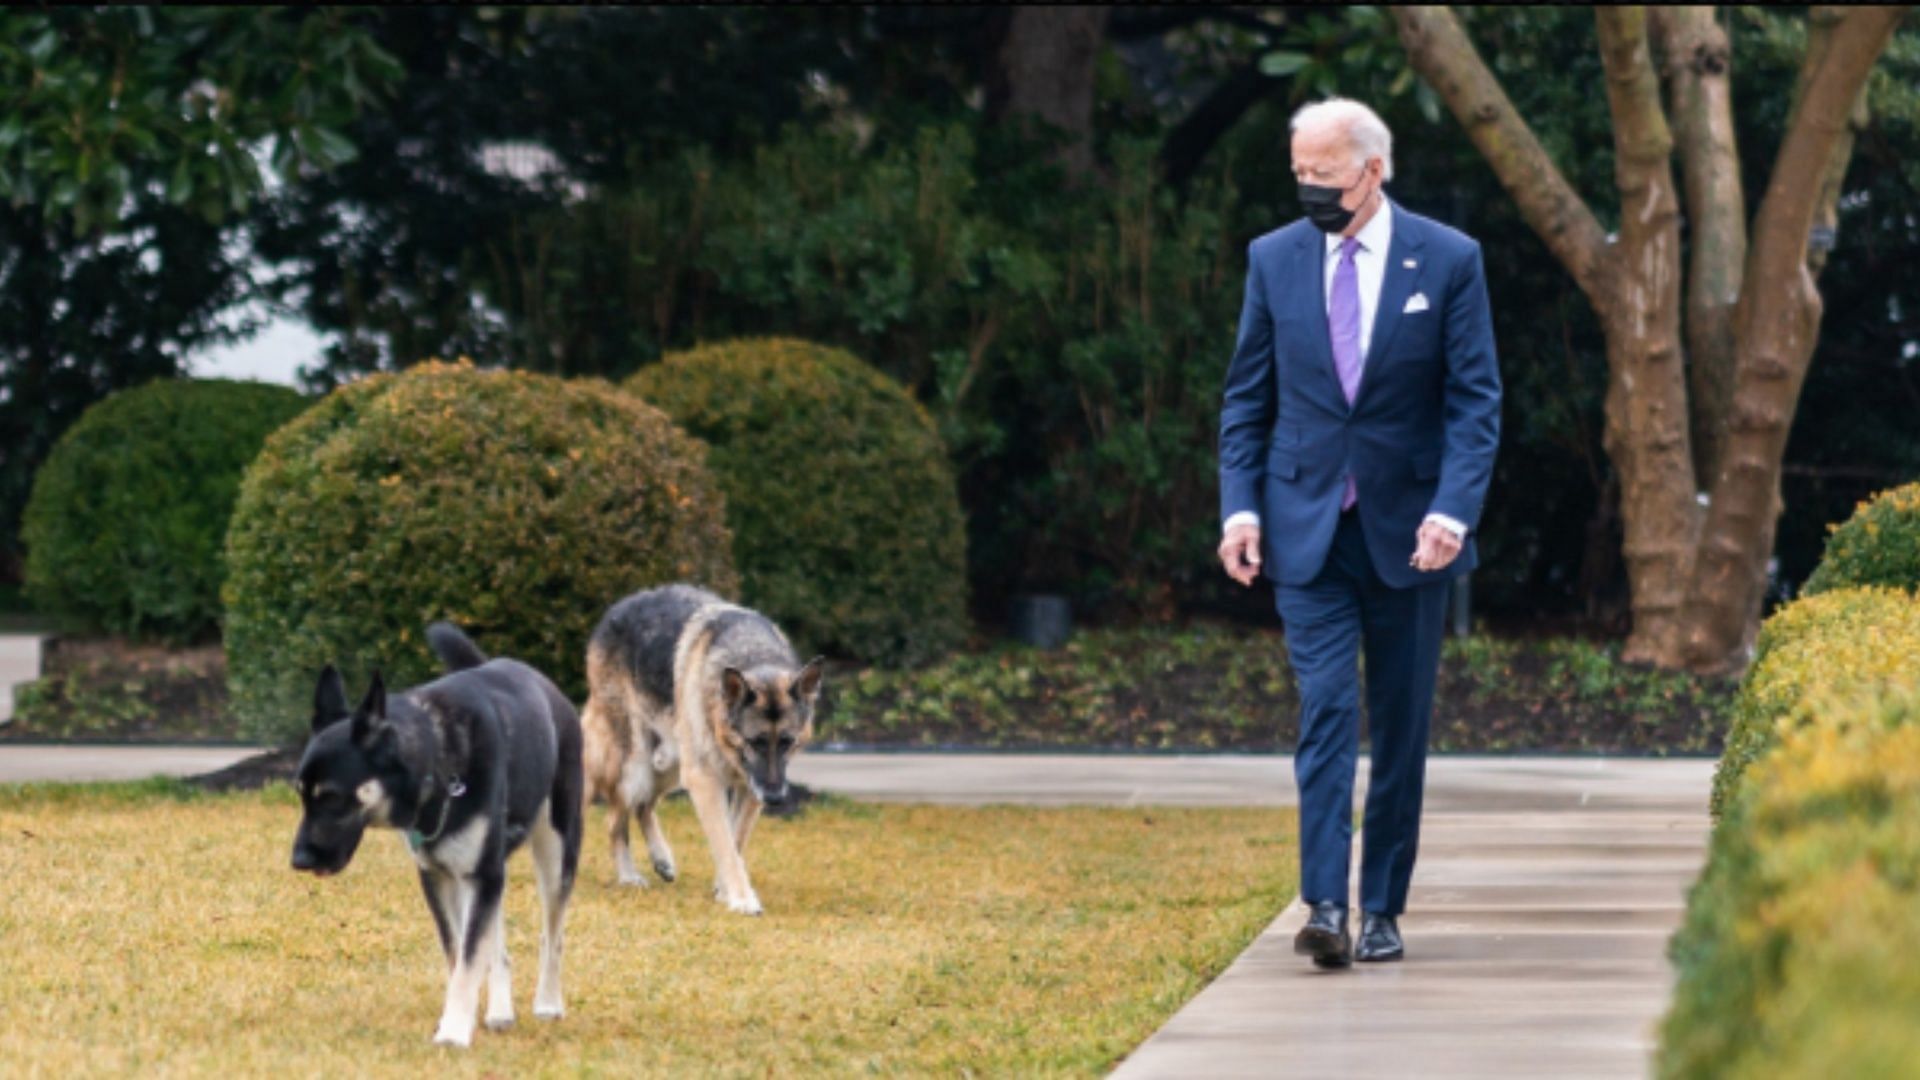 Biden family dog Commander has been removed from the White House after several biting incidents. (Image via X/dom_lucre)